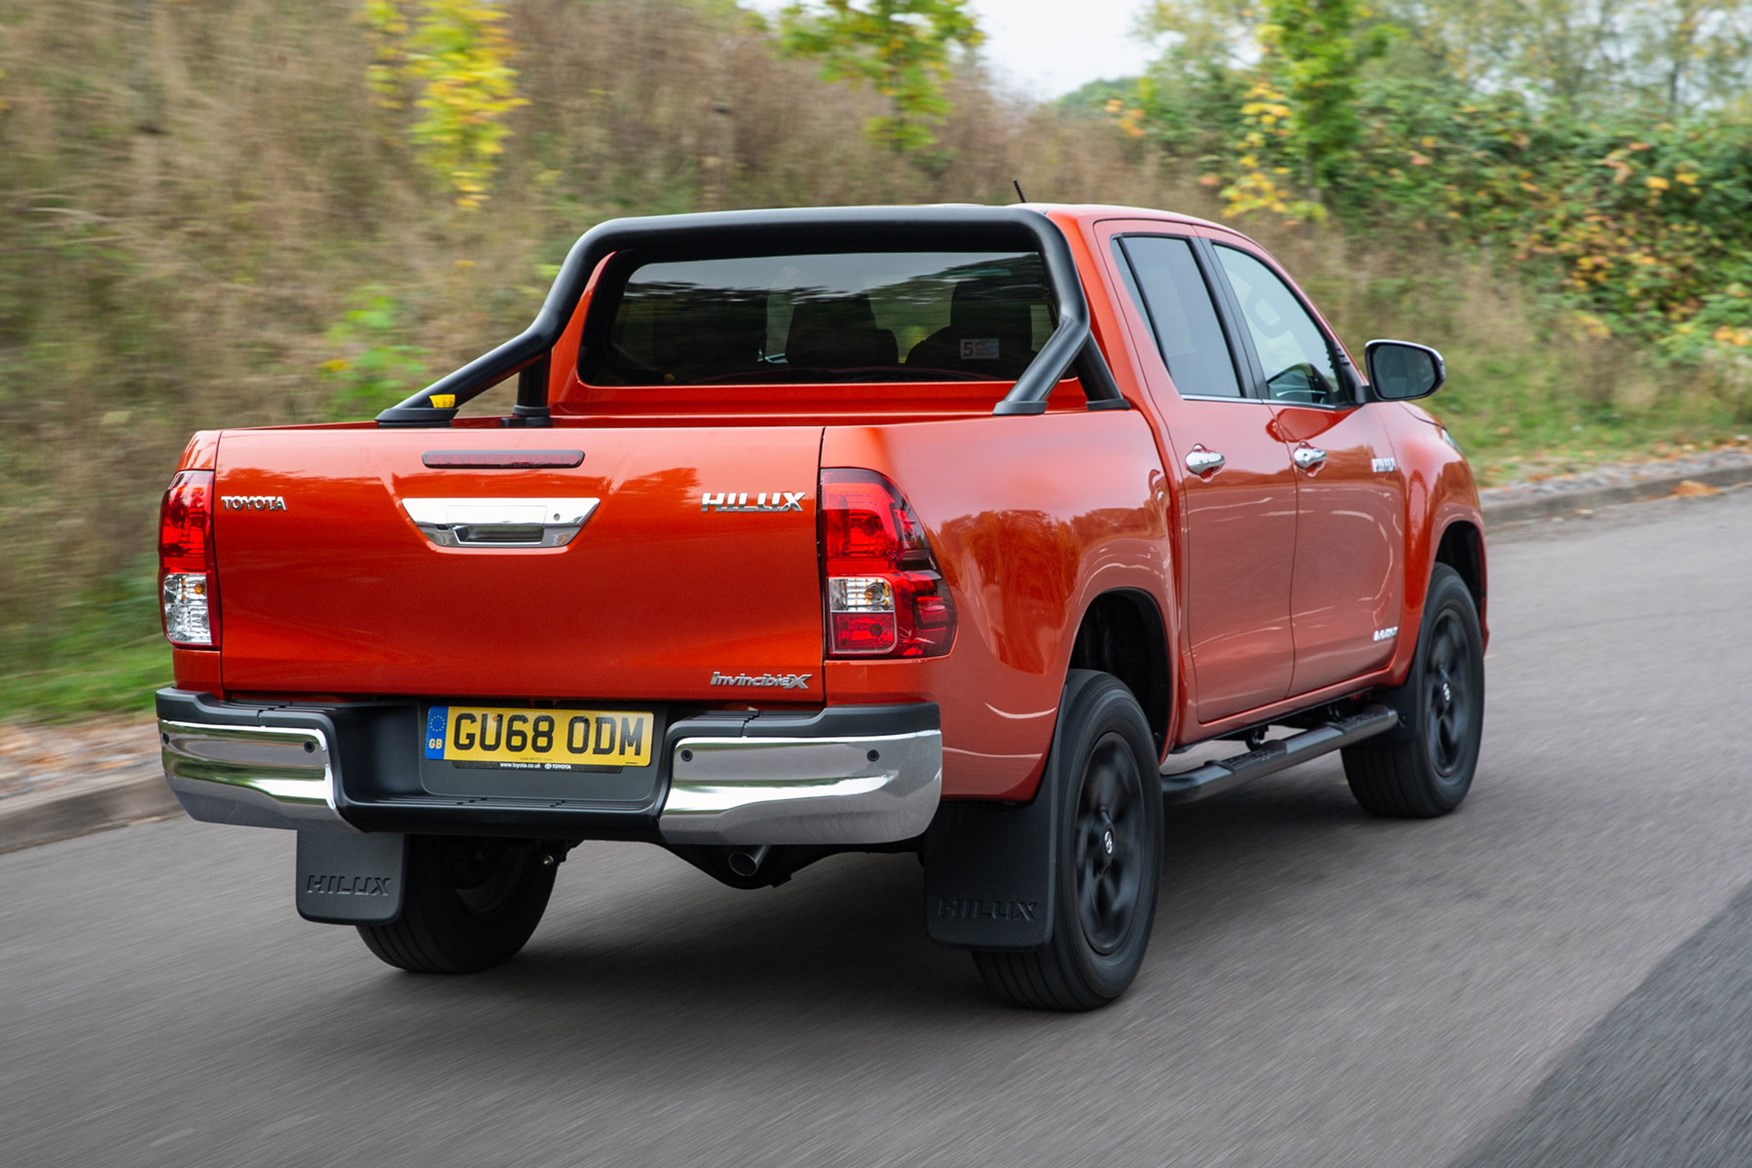 Toyota Hilux review - rear view, driving, Invincible X, orange